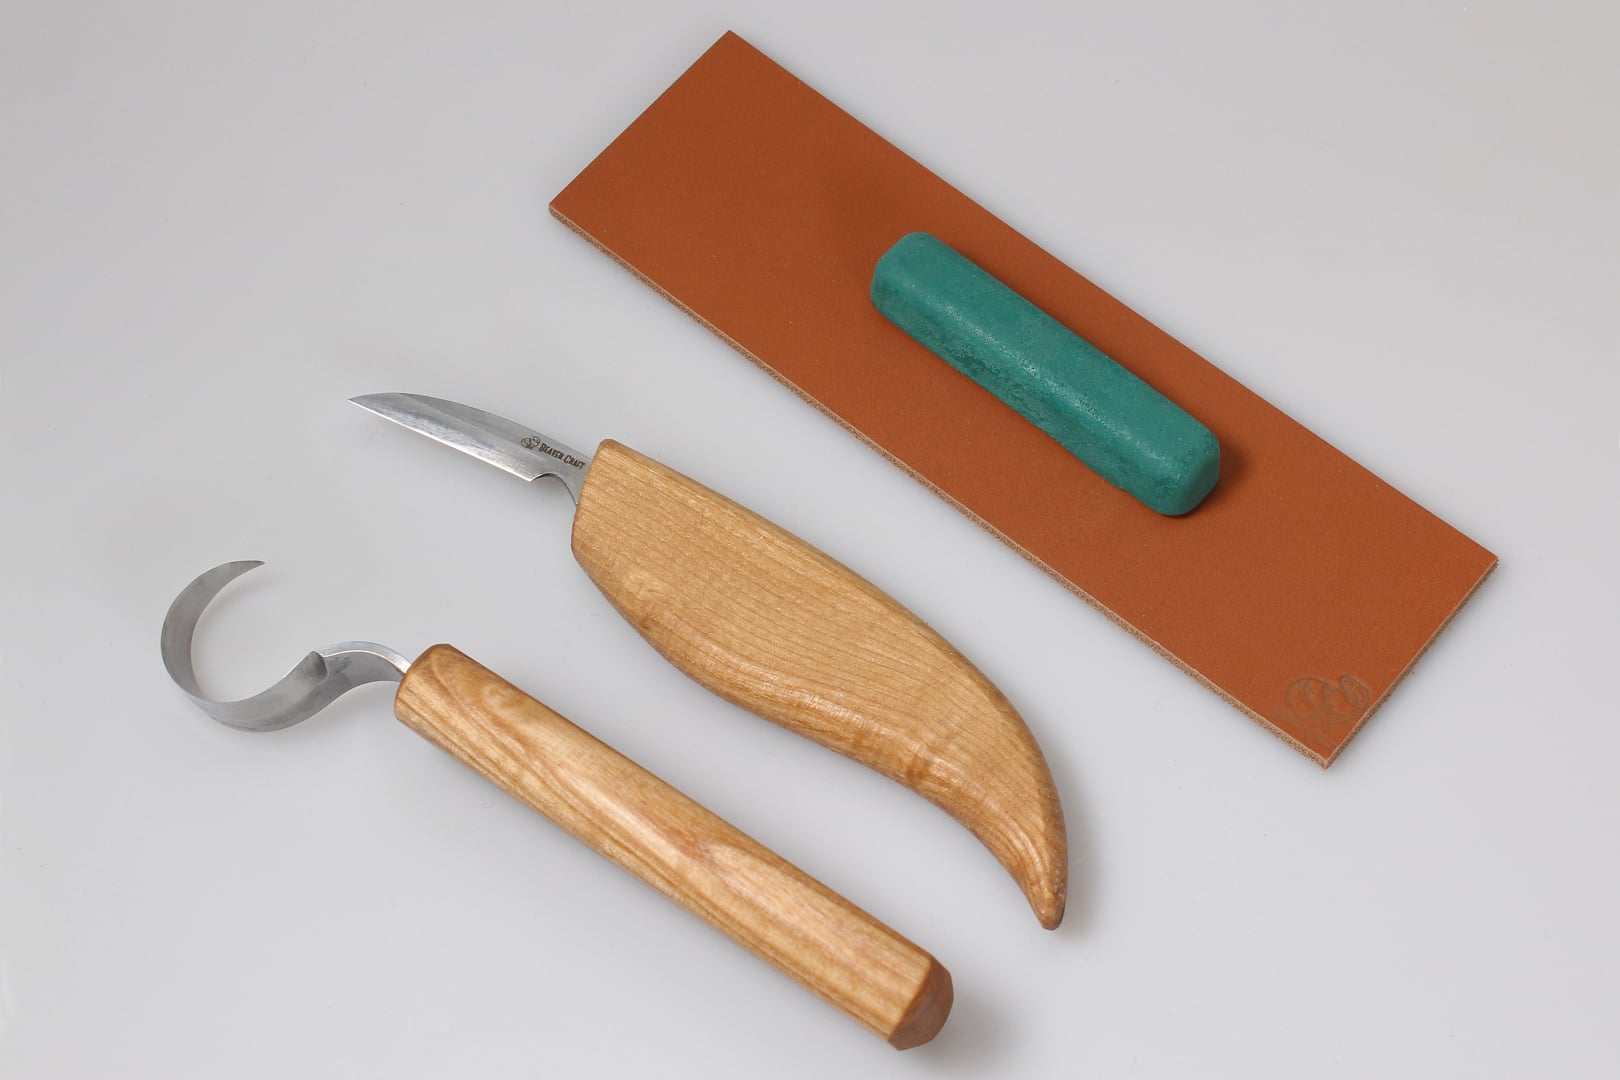 Spoon Carving Set with Hook & Detail Knife BeaverCraft S02